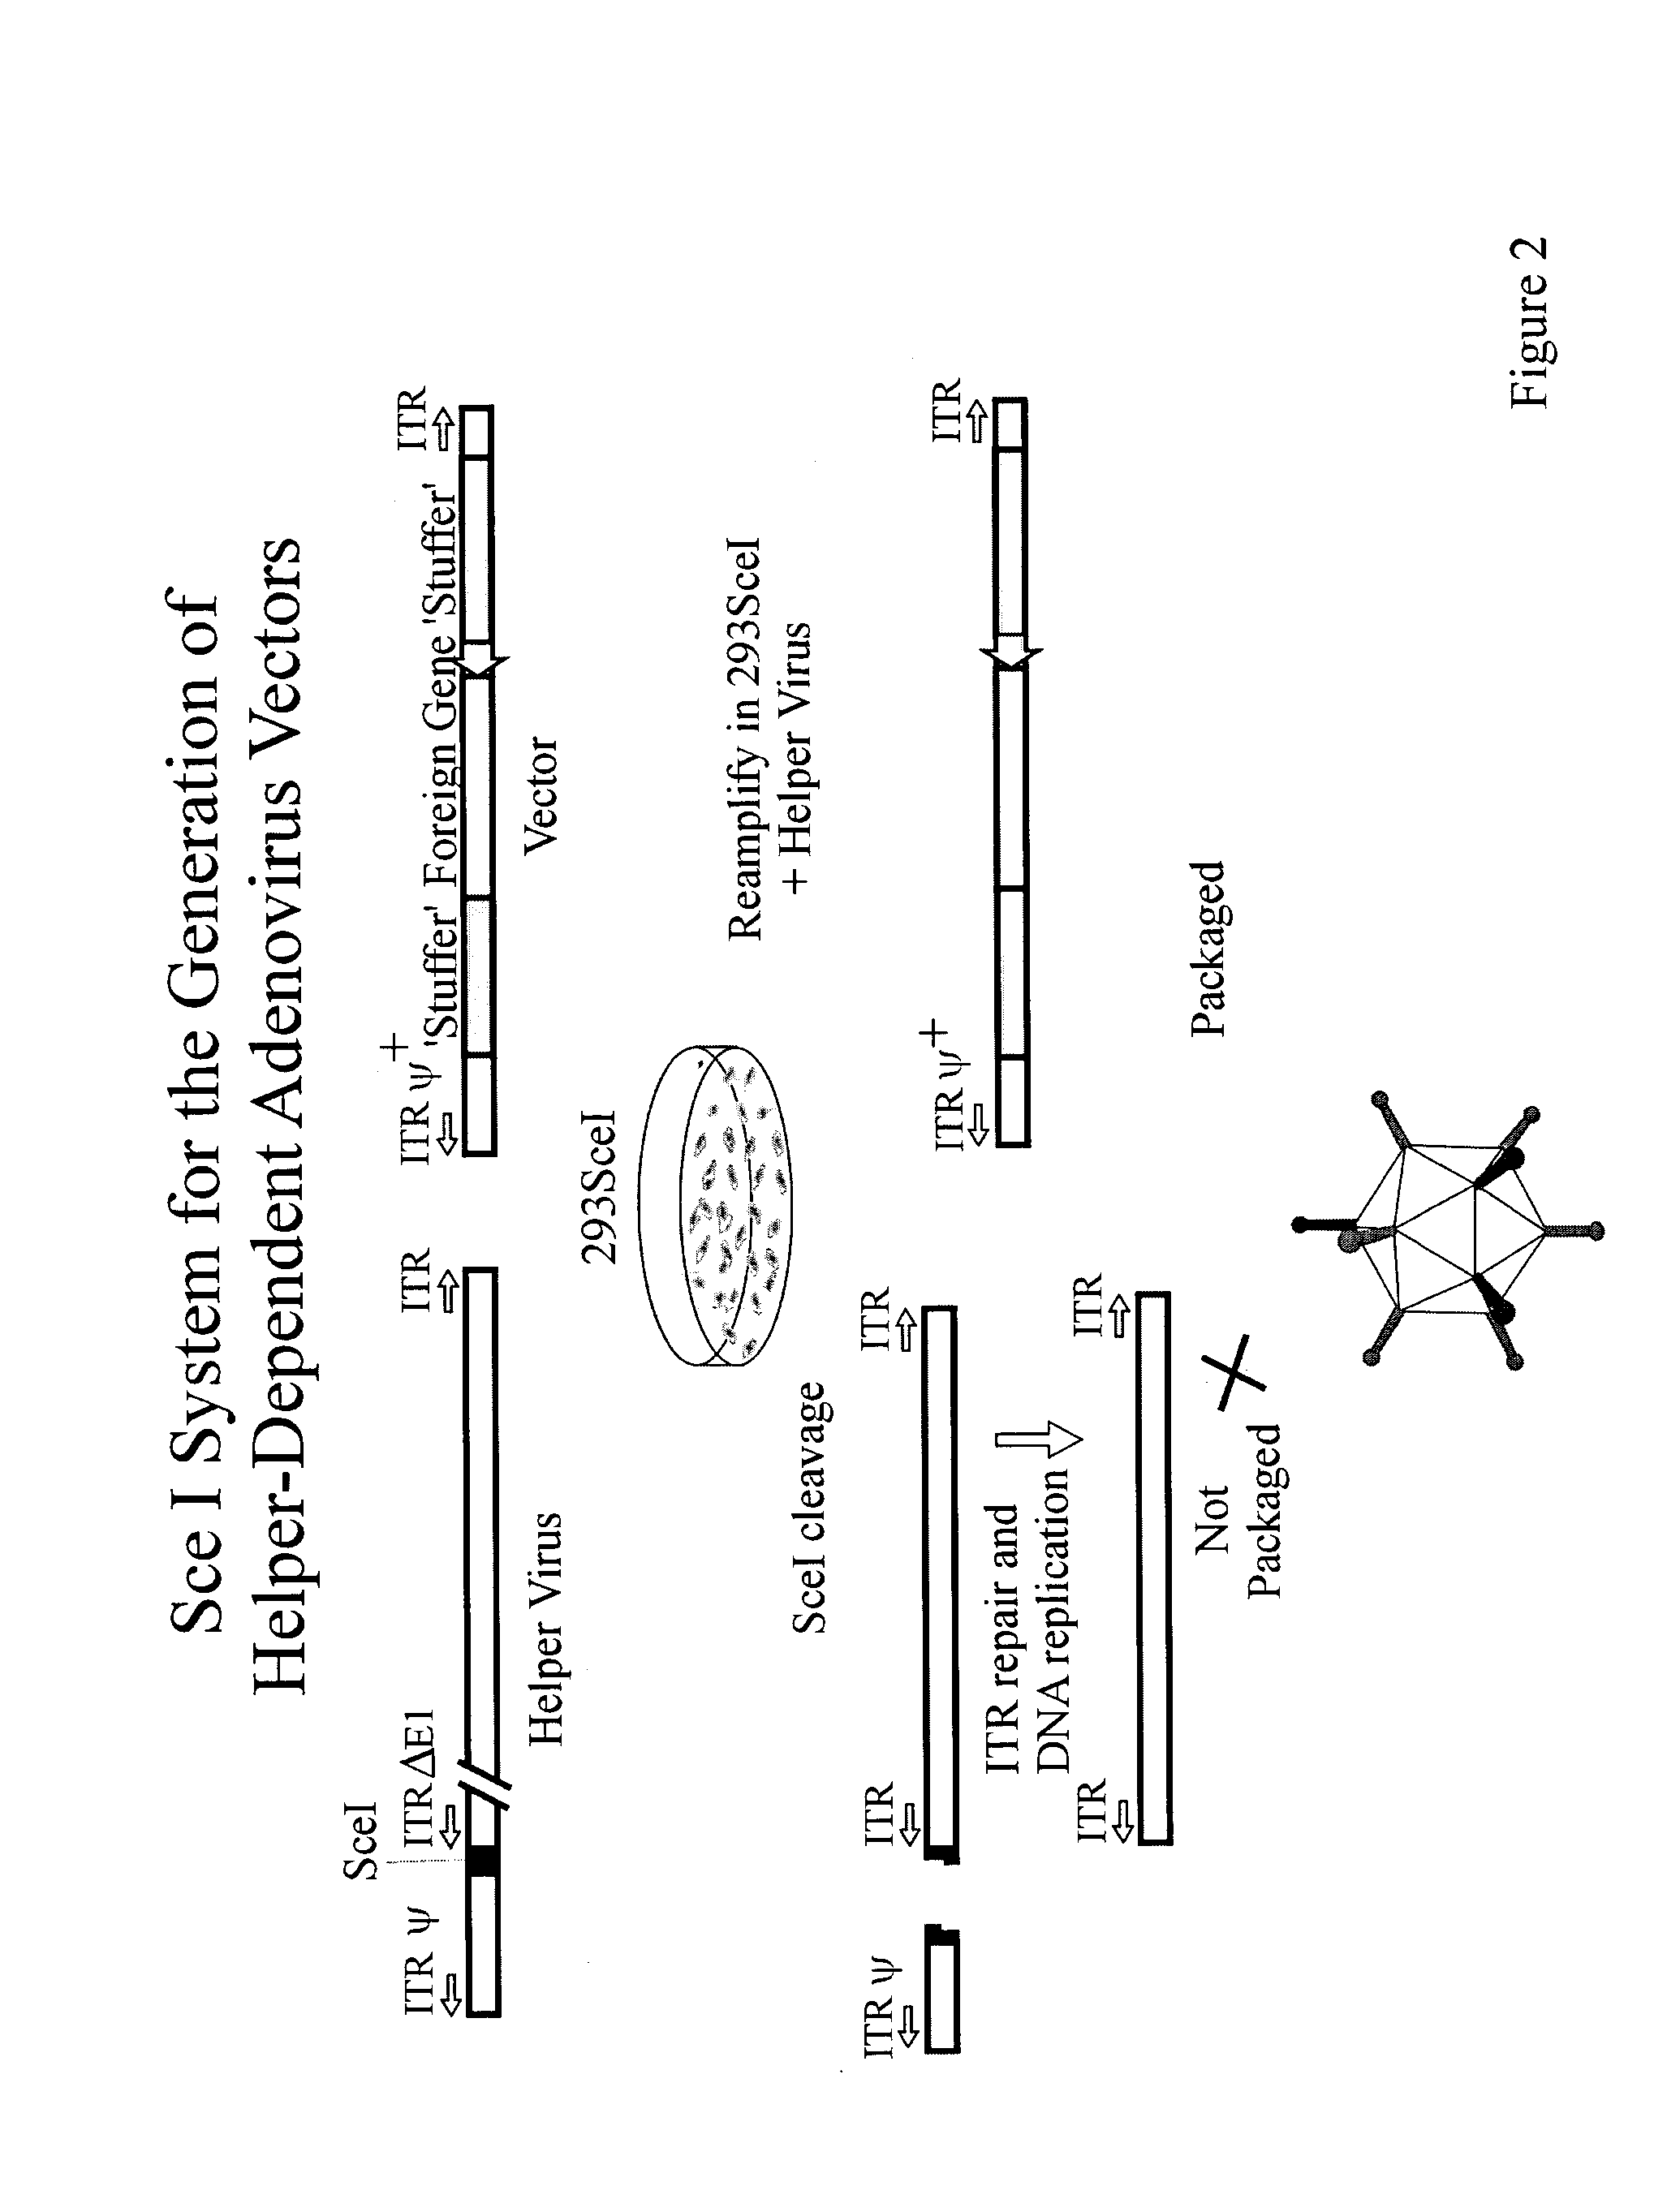 System for production of helper dependent adenovirus vectors based on use of endonucleases